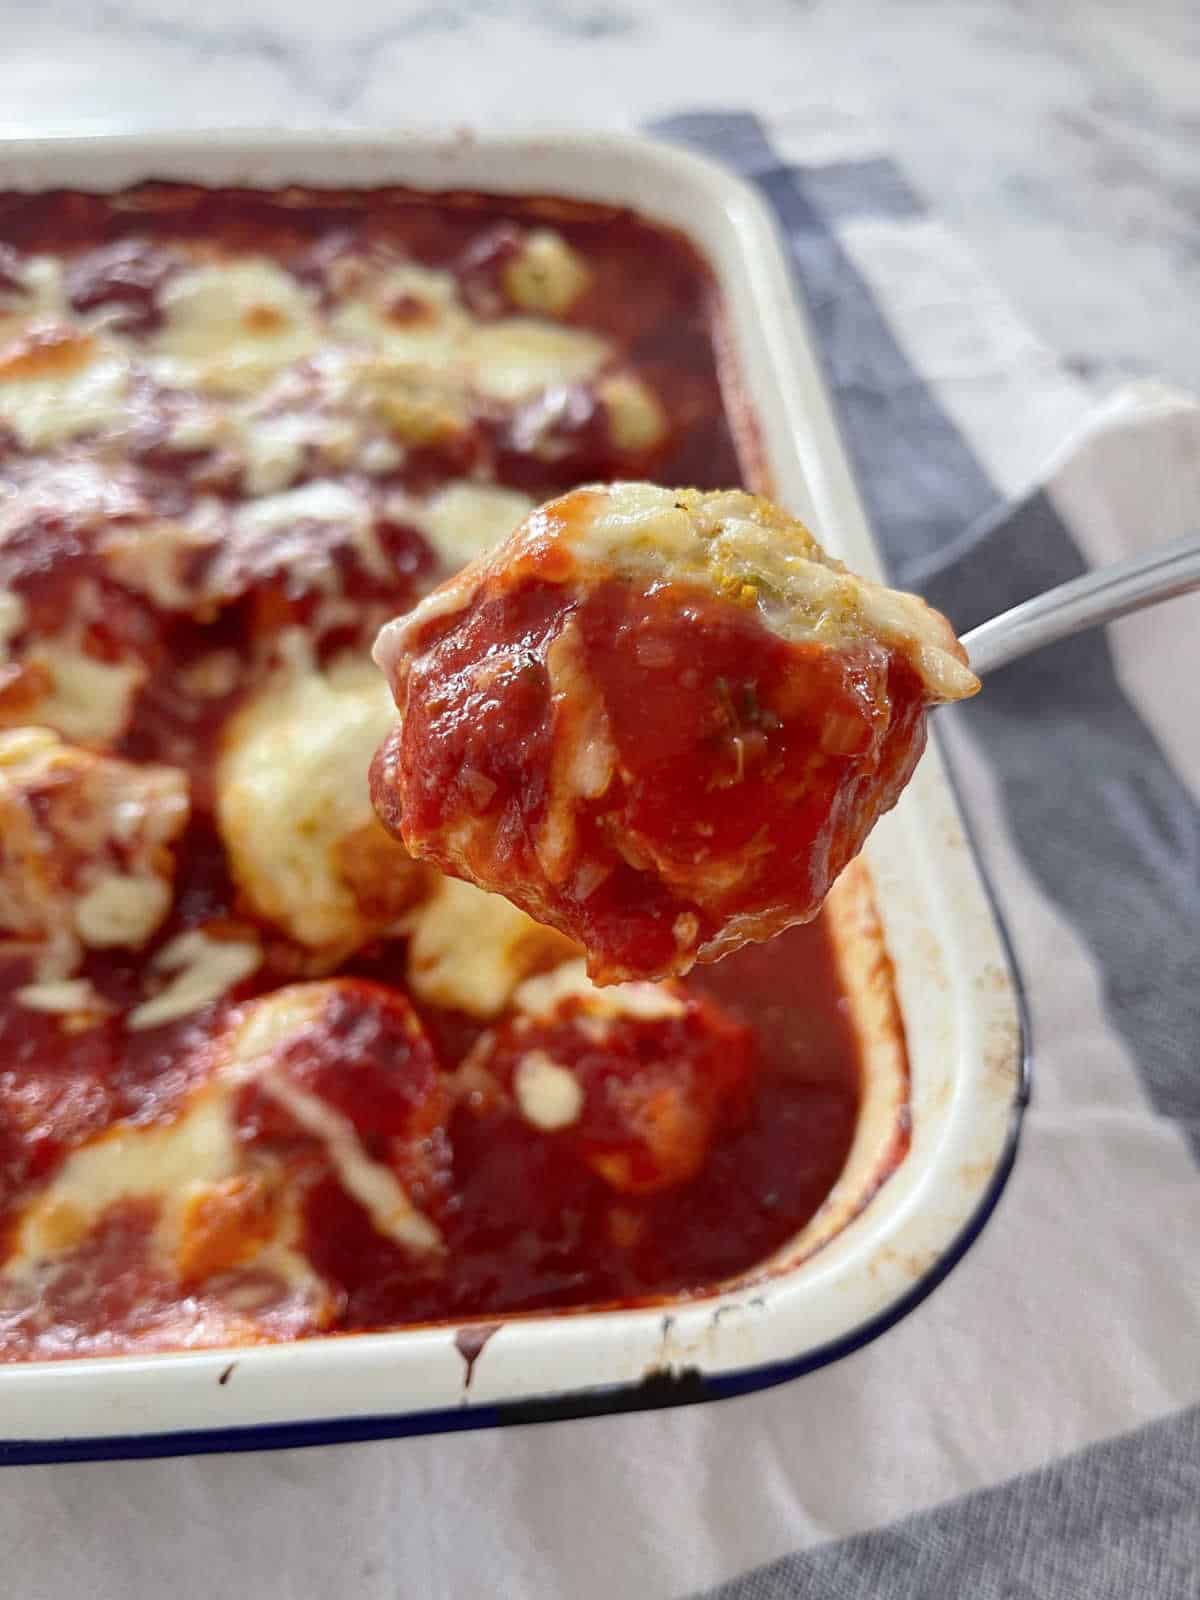 spoon holding a baked chicken parma ball with a tray in the background.